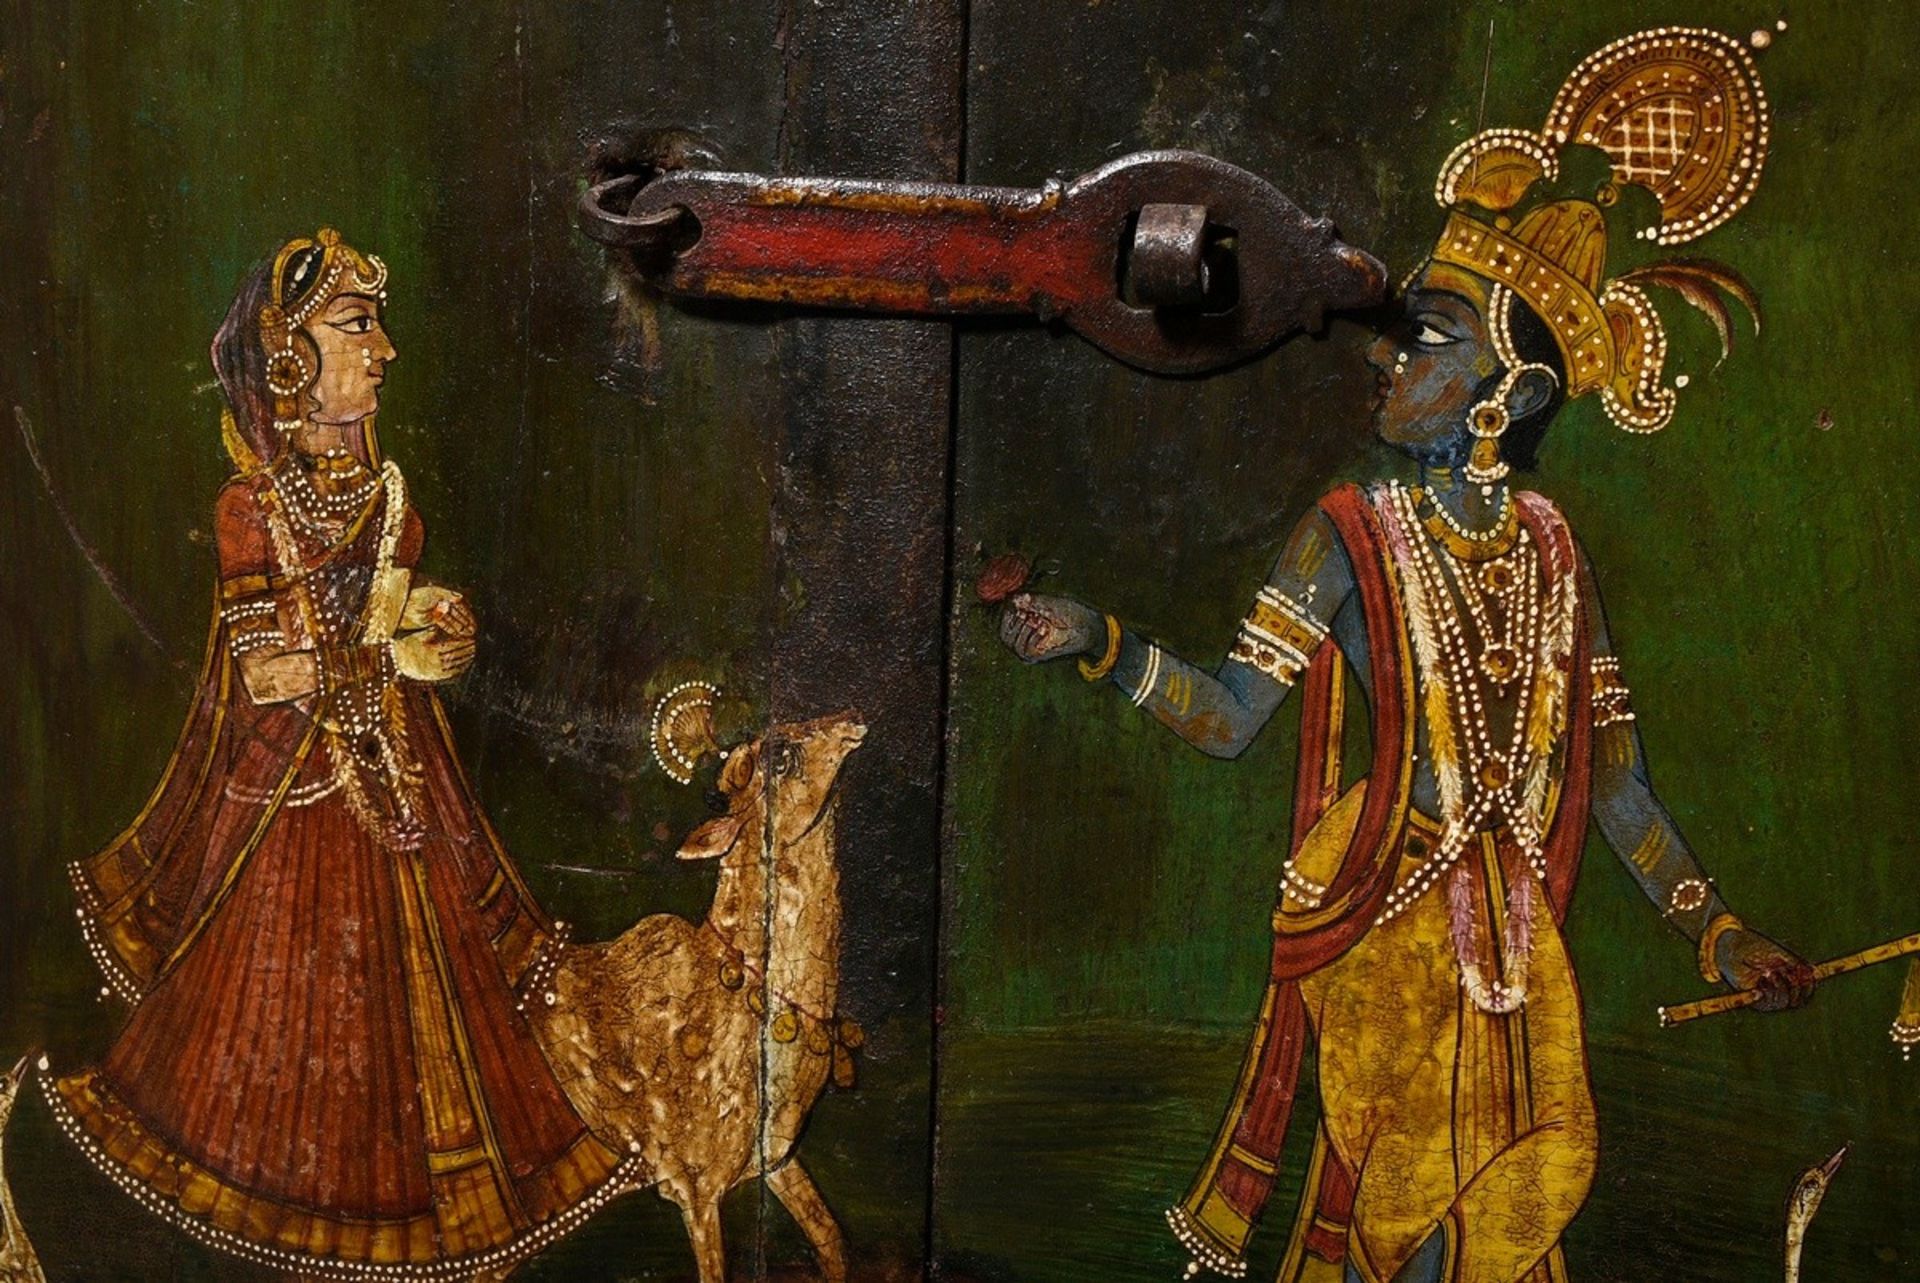 Indian furniture door with polychrome painting "Krishna and Parvati", around 1890/1900, 52,5x49,5cm - Image 2 of 7